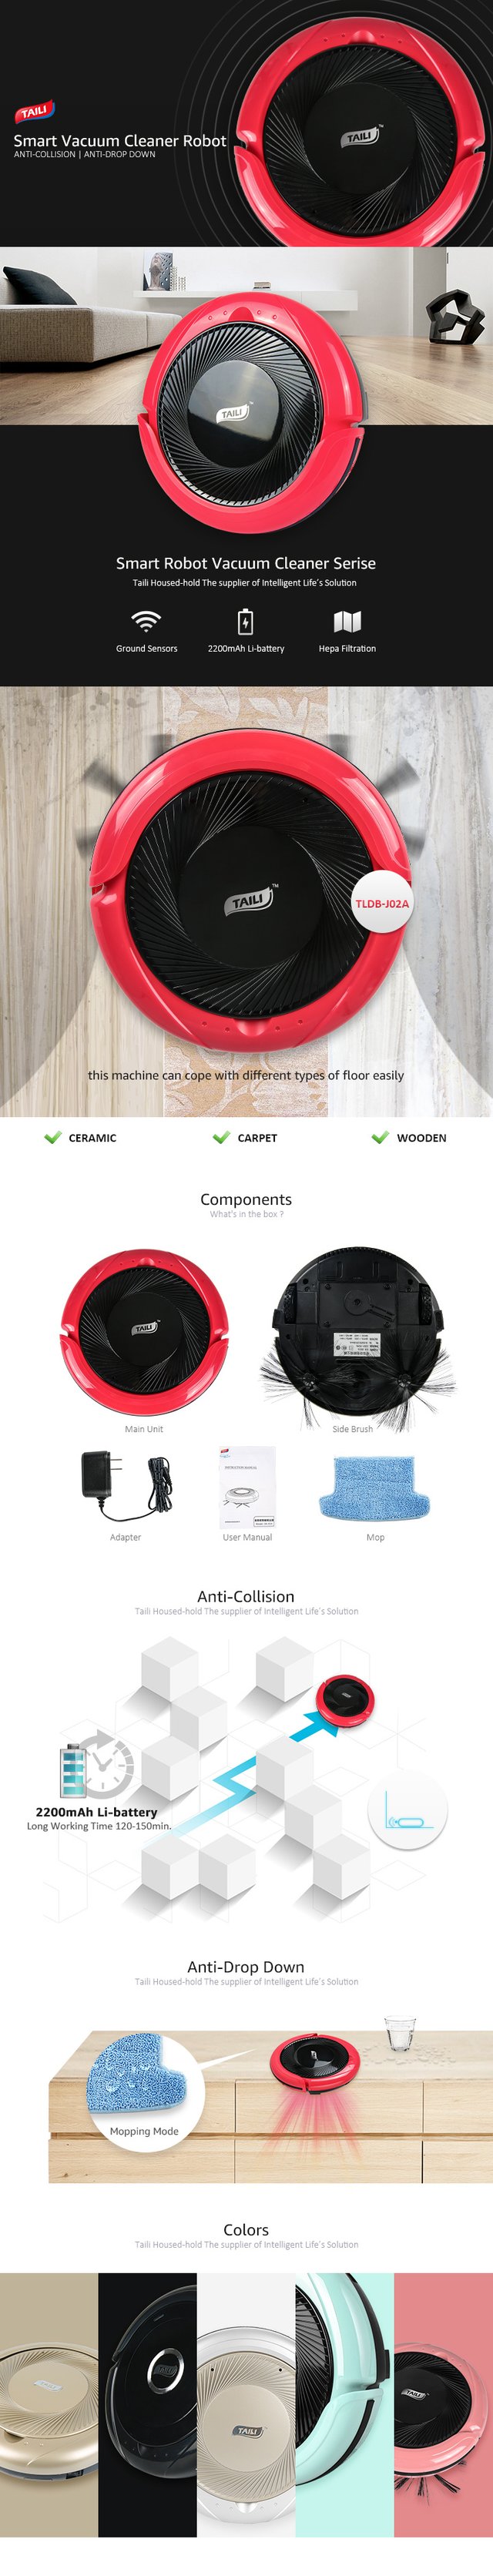 2018-Most-Popular-Intelligent-Cheap-and-Good-Robot-Vacuum-Cleaner.jpg